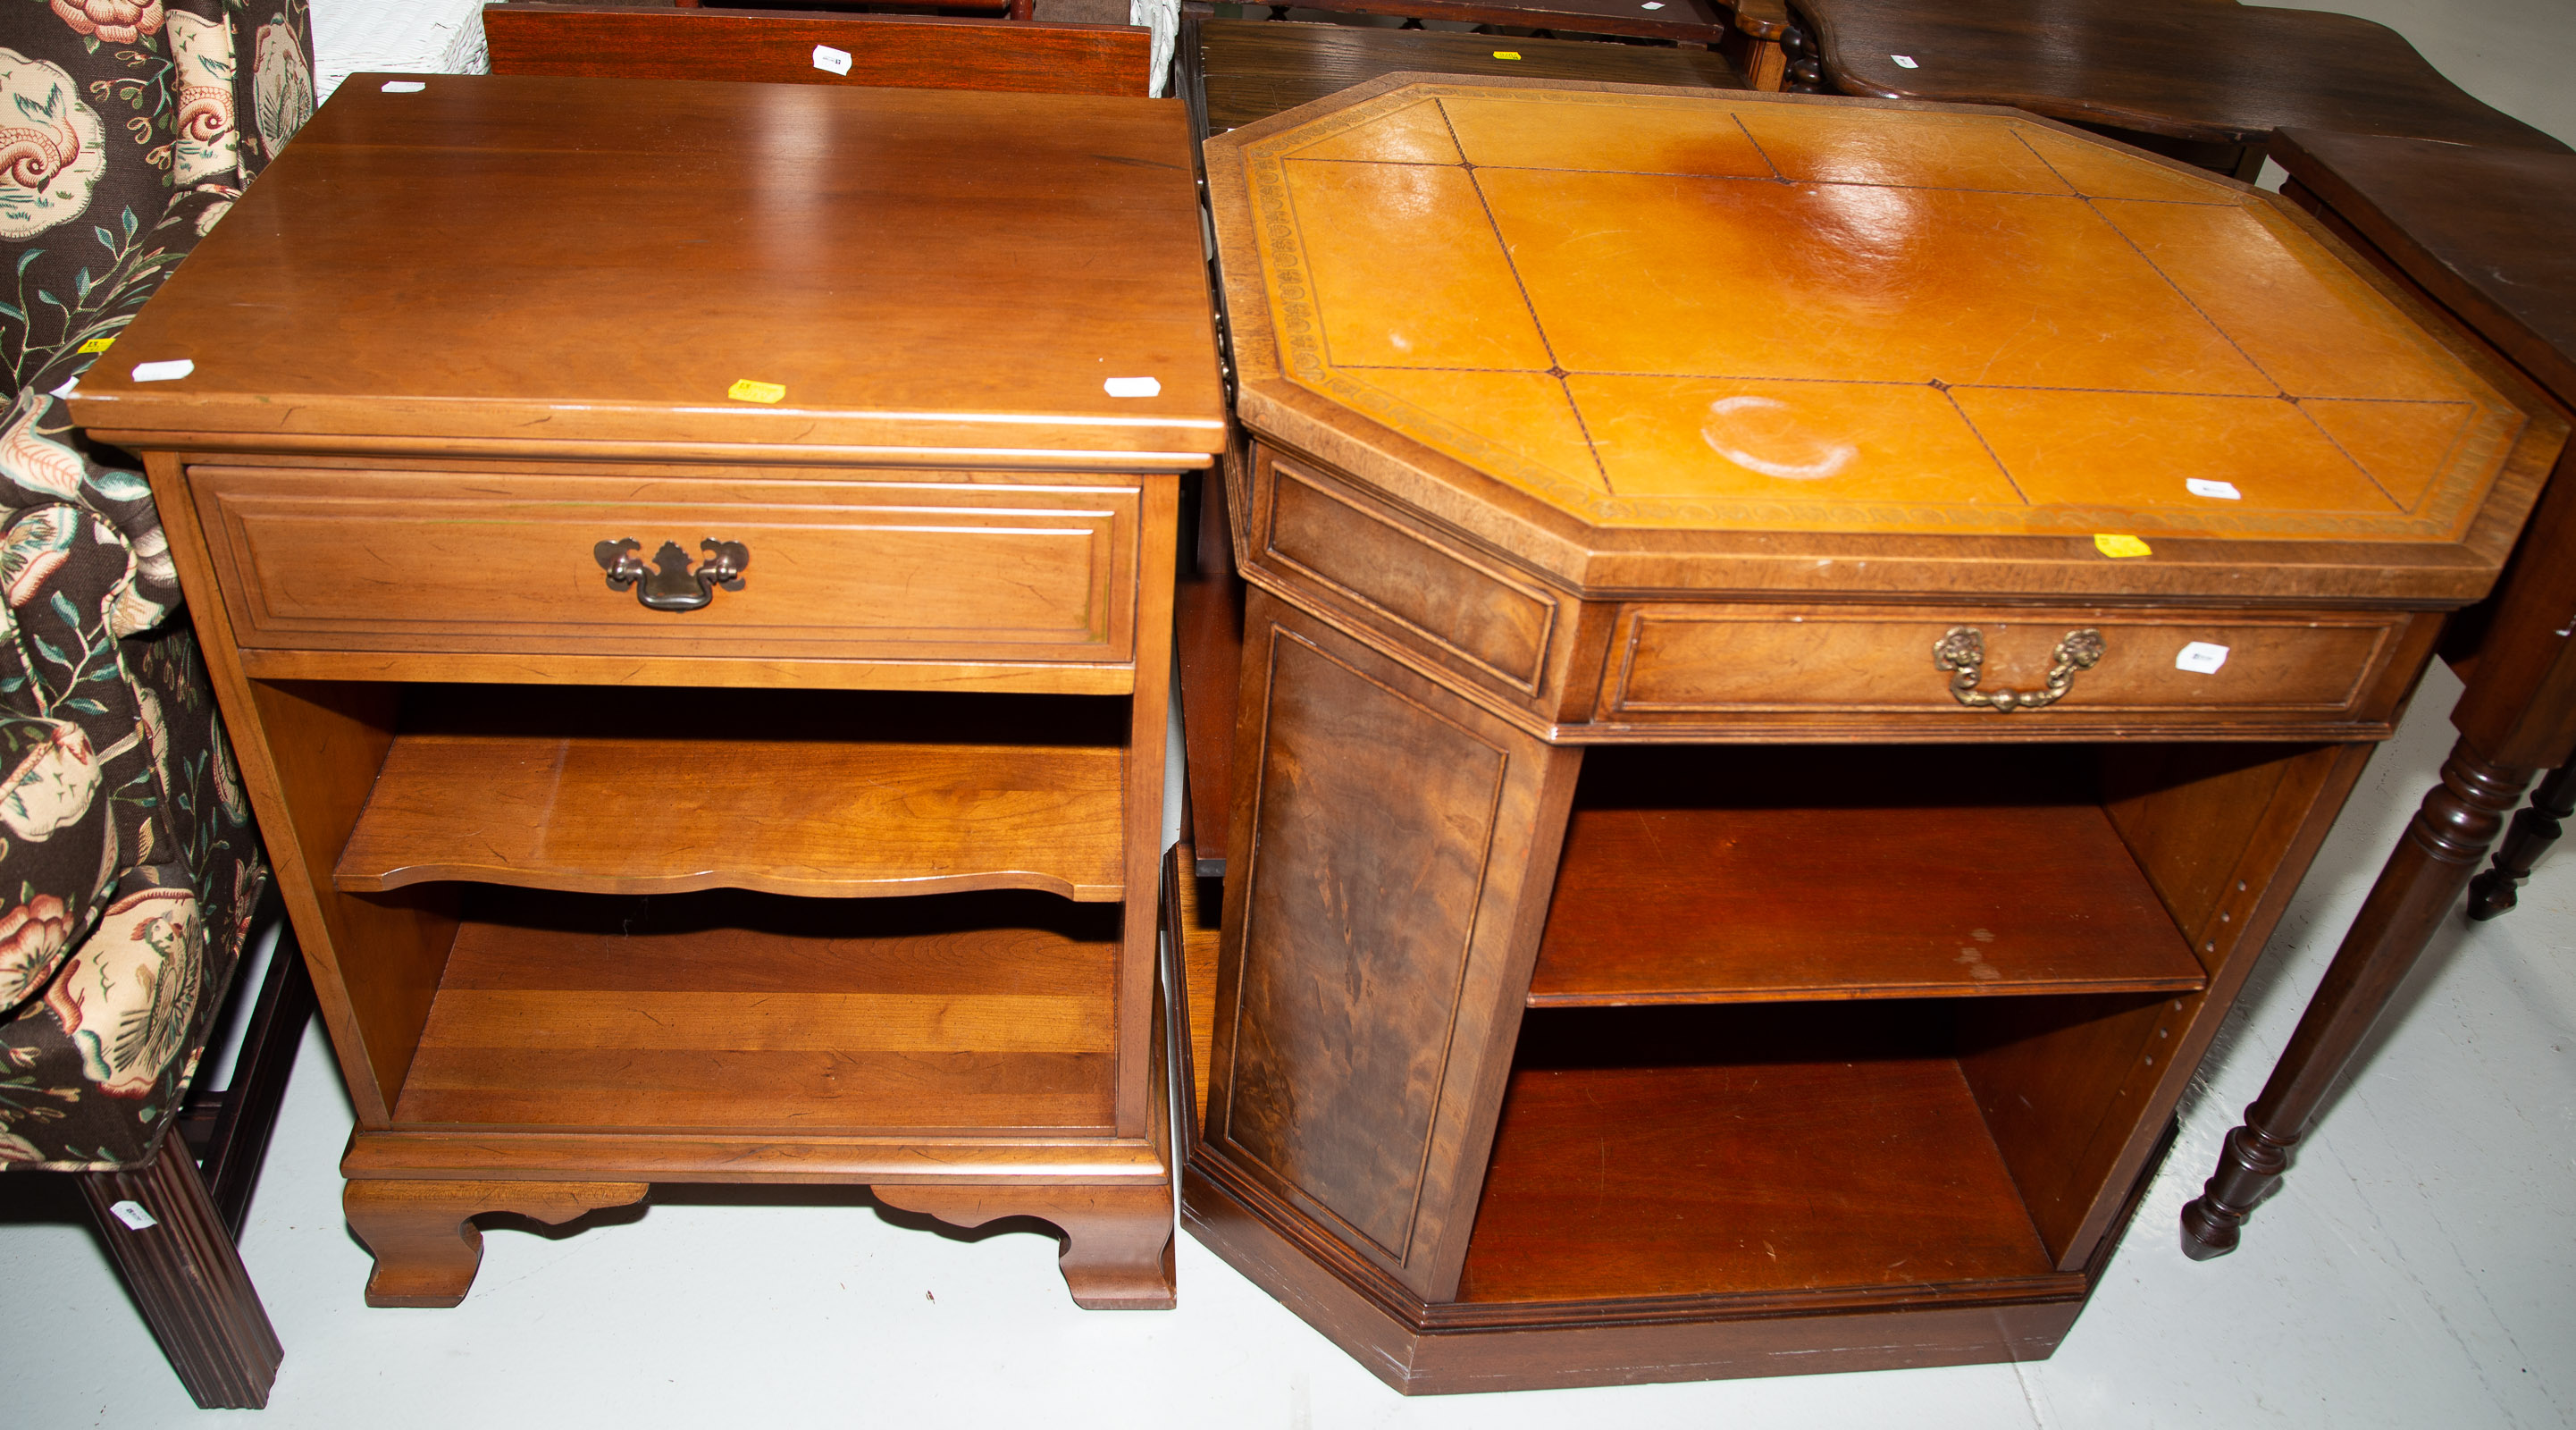 TWO PIECES OF TRADITIONAL FURNITURE